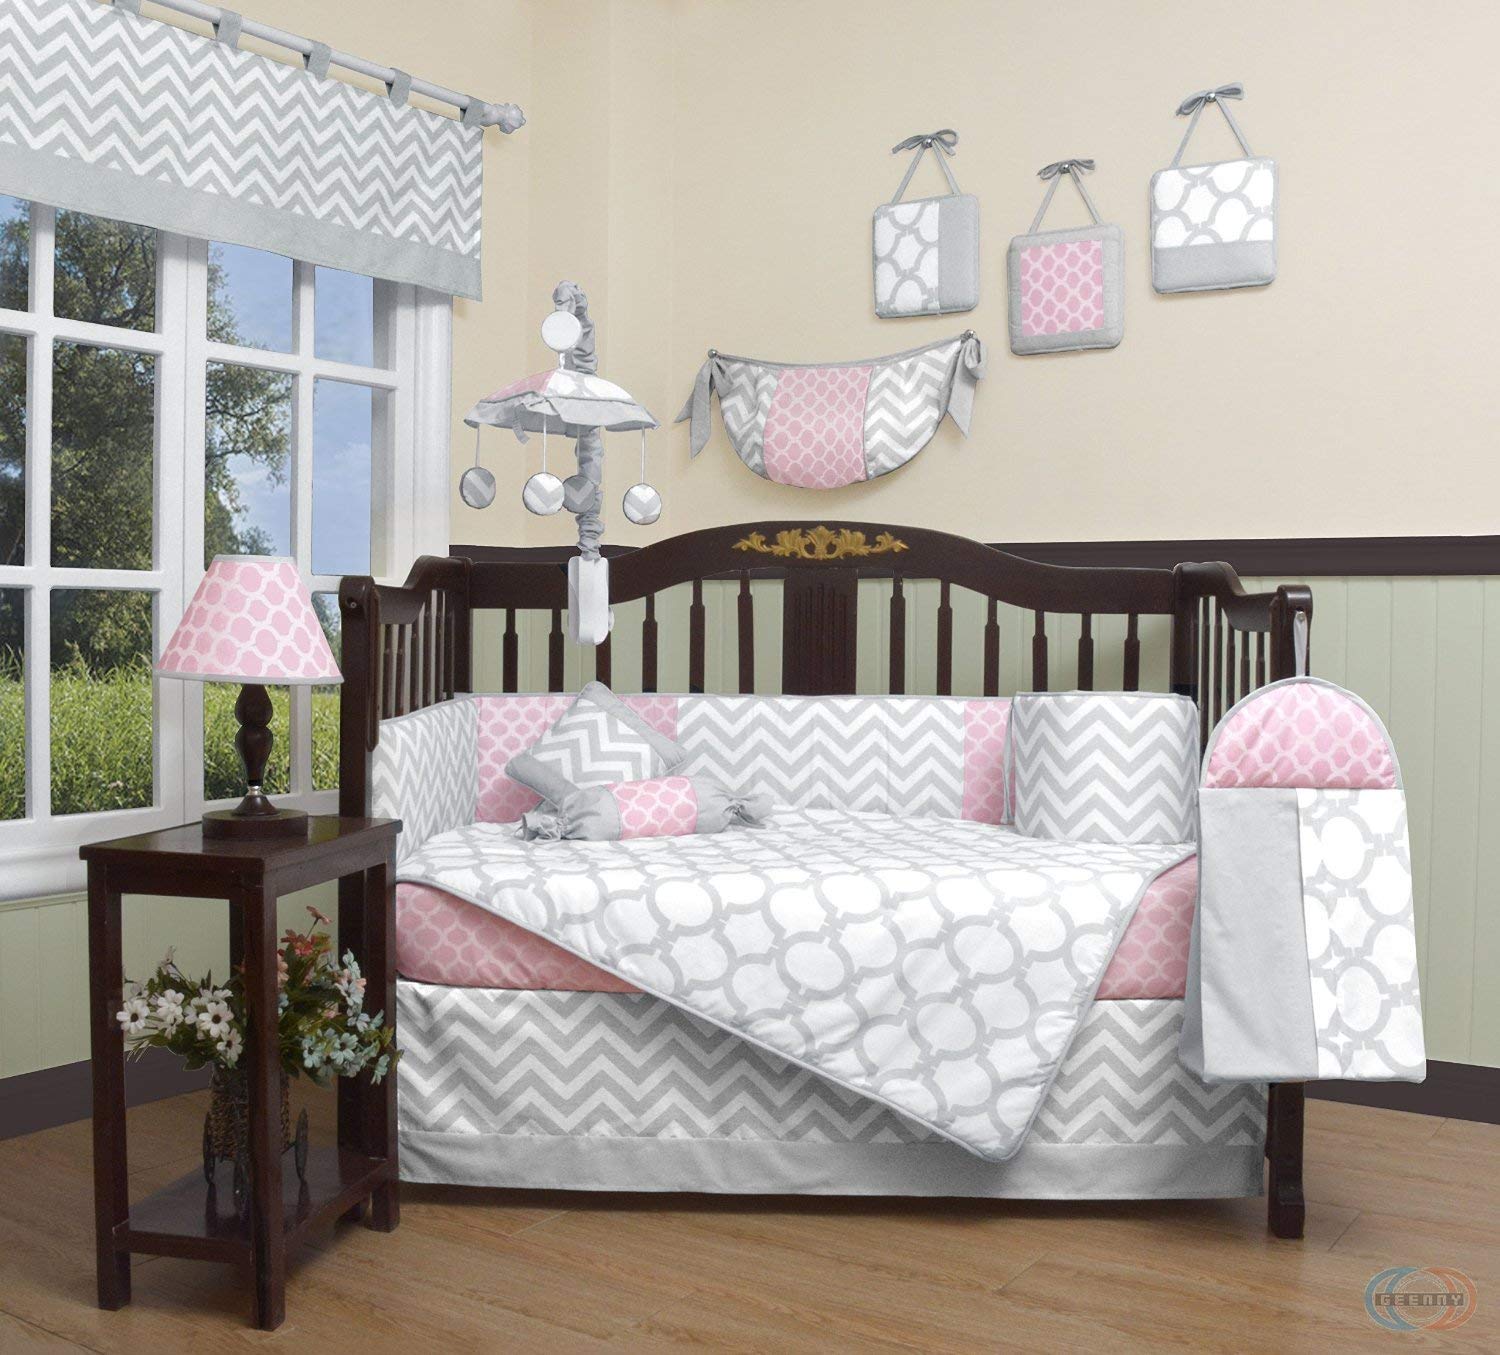 Baby bed linen amazon.com: geenny boutique baby 13-piece baby bed linen set, salmon UBPQVYK